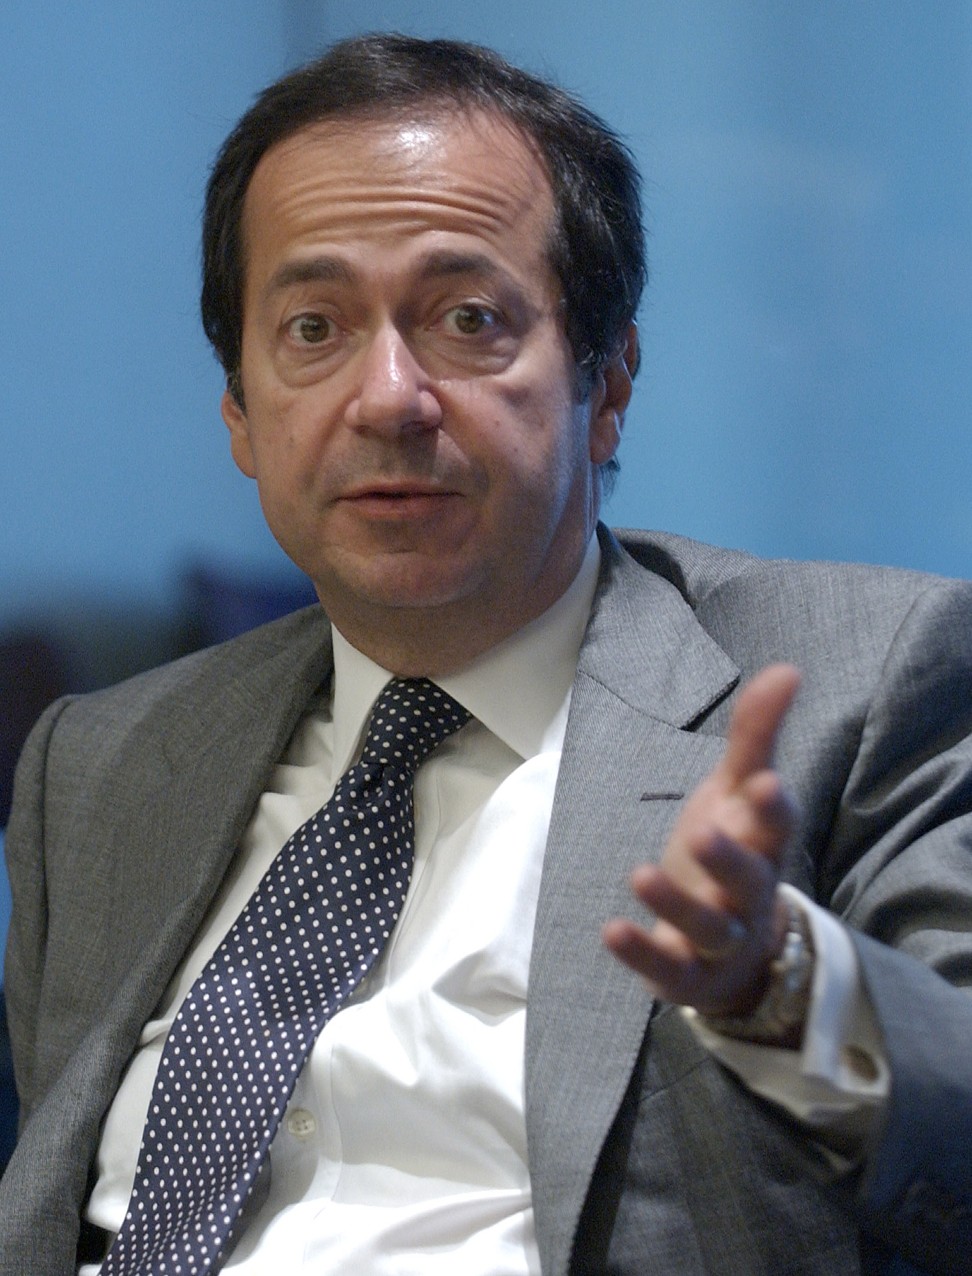 John Paulson, founder of New York-based hedge fund Paulson & Co, bet against the US housing market ahead of the subprime mortgage crisis. Photo: Reuters